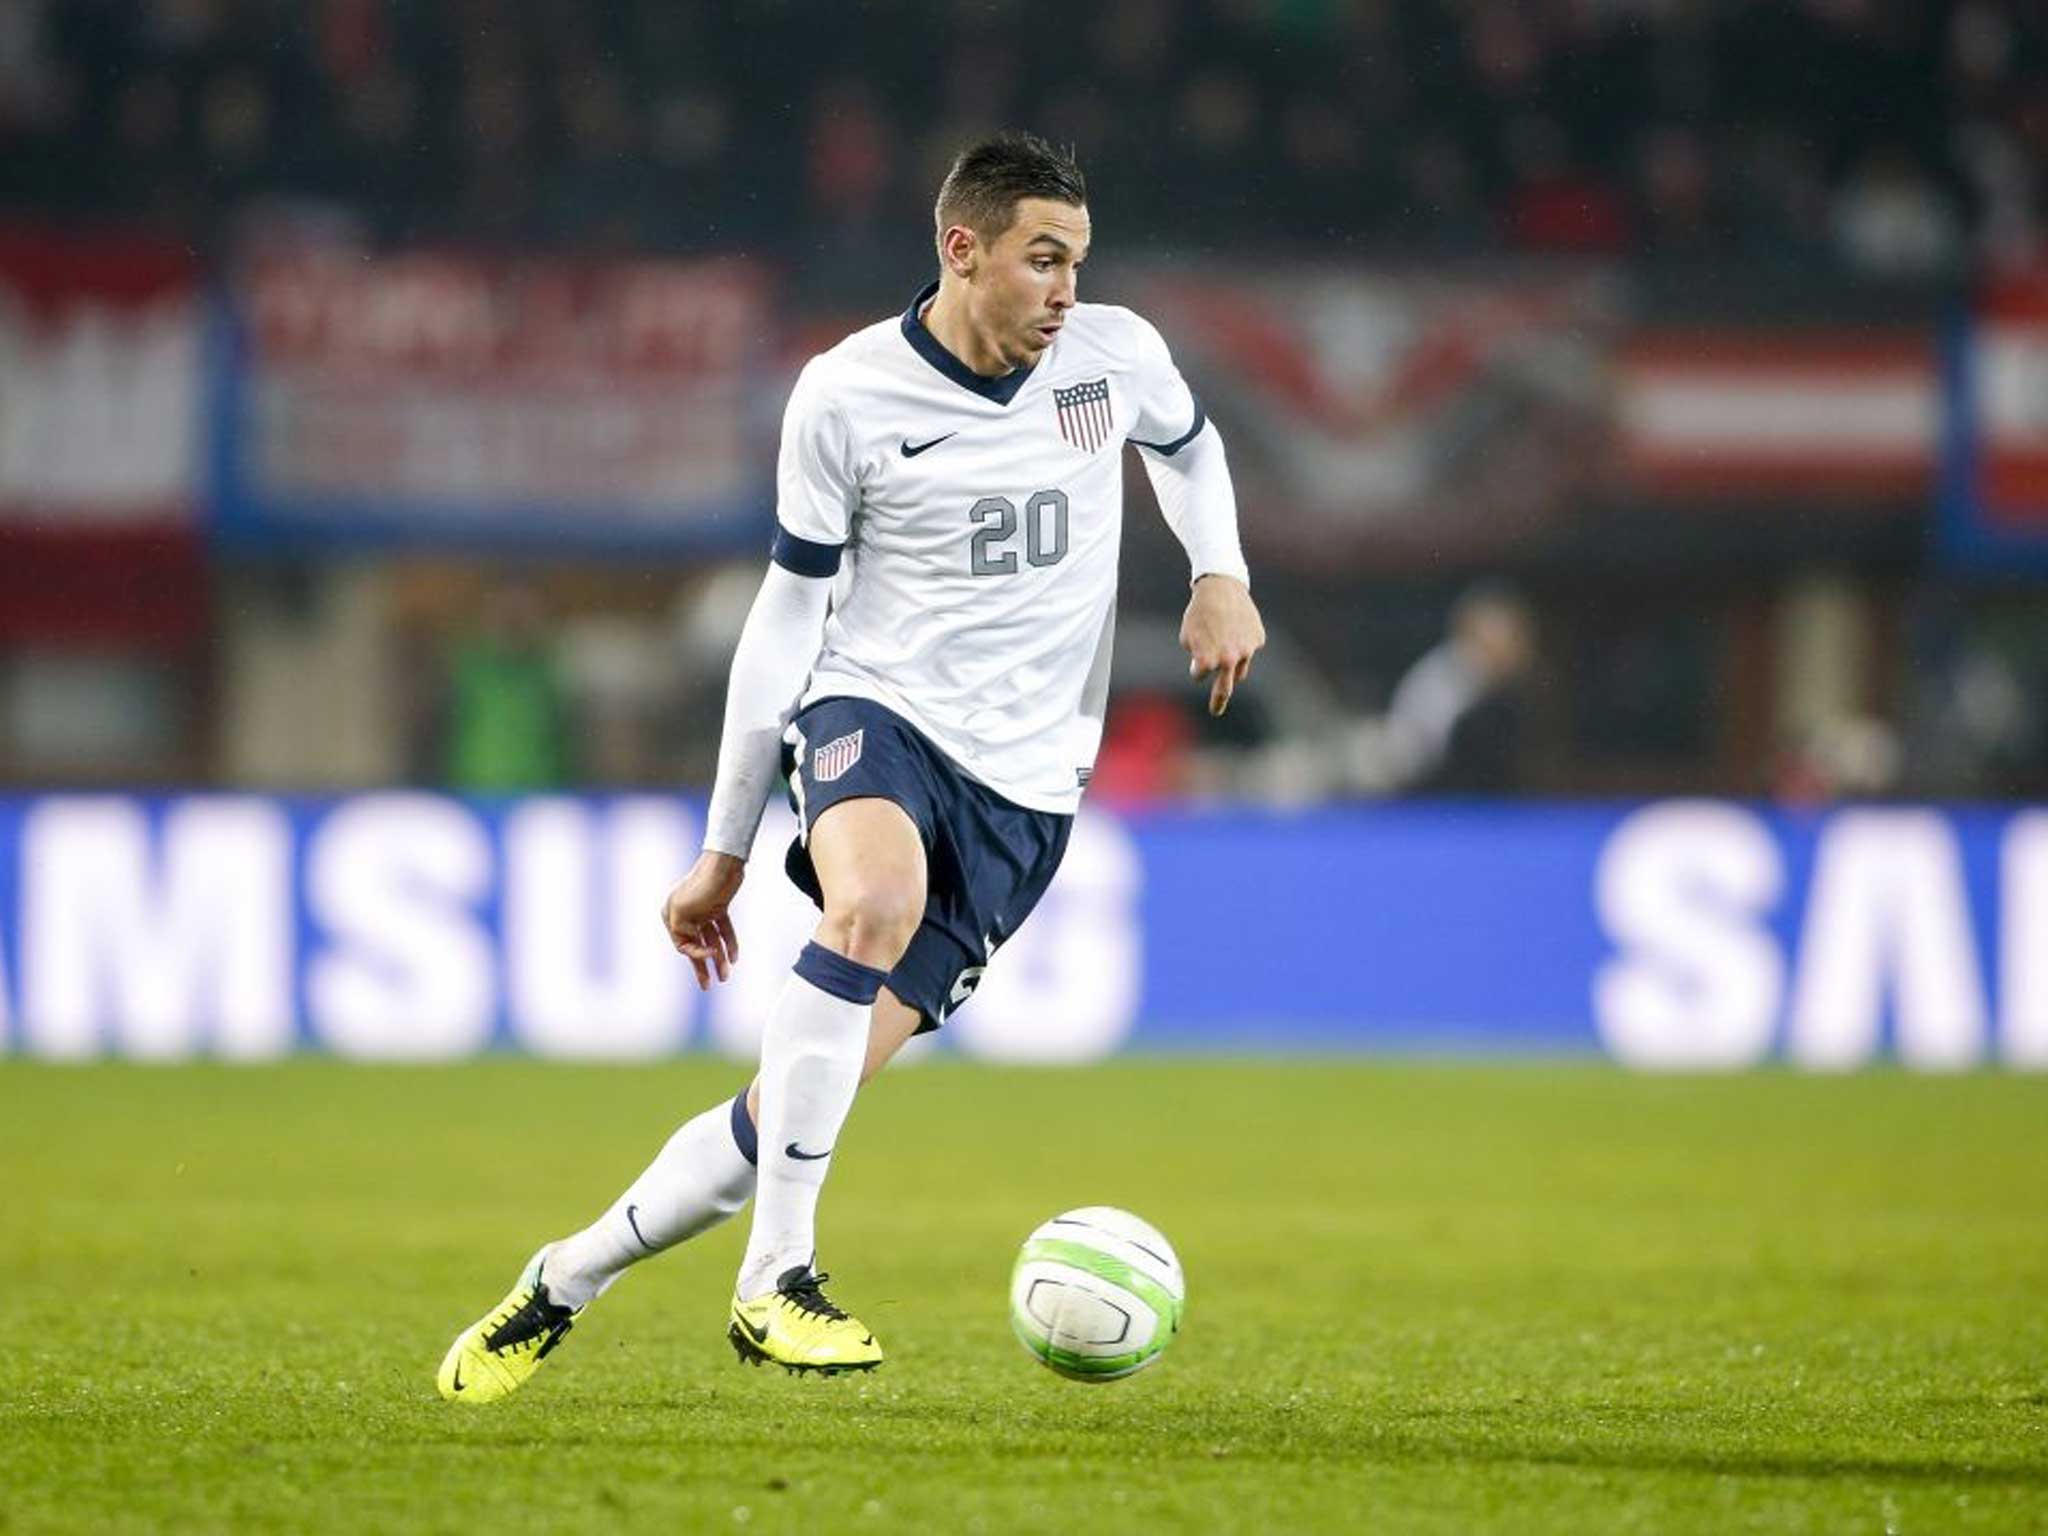 Geoff Cameron of USA controls the ball during the International friendly match between Austria and USA